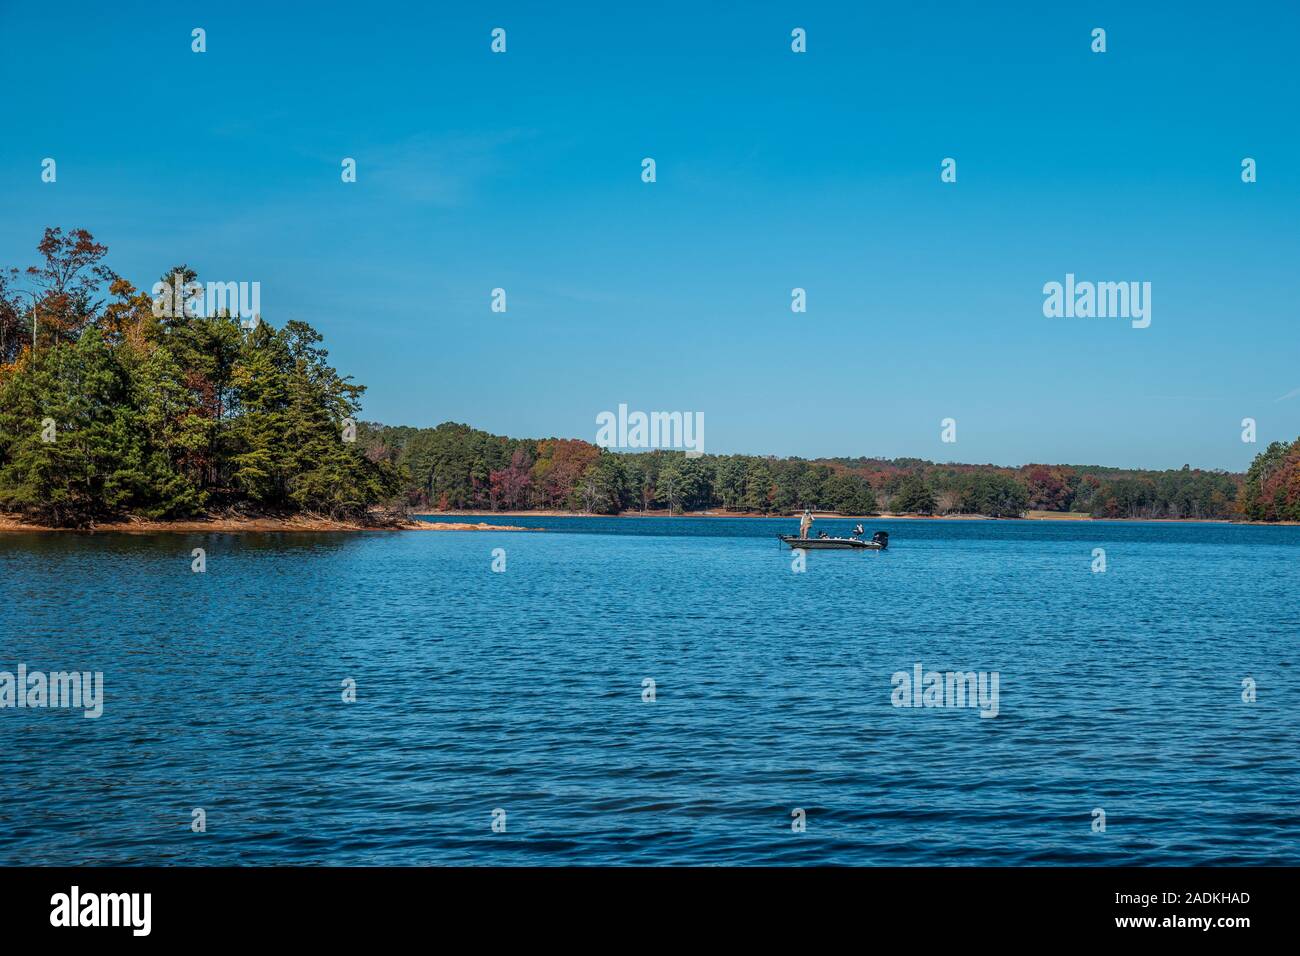 A man fishing on Lake Lanier, Georgia in a motorboat casting a line into the lake off the island shoreline on a vibrant sunny day in autumn Stock Photo